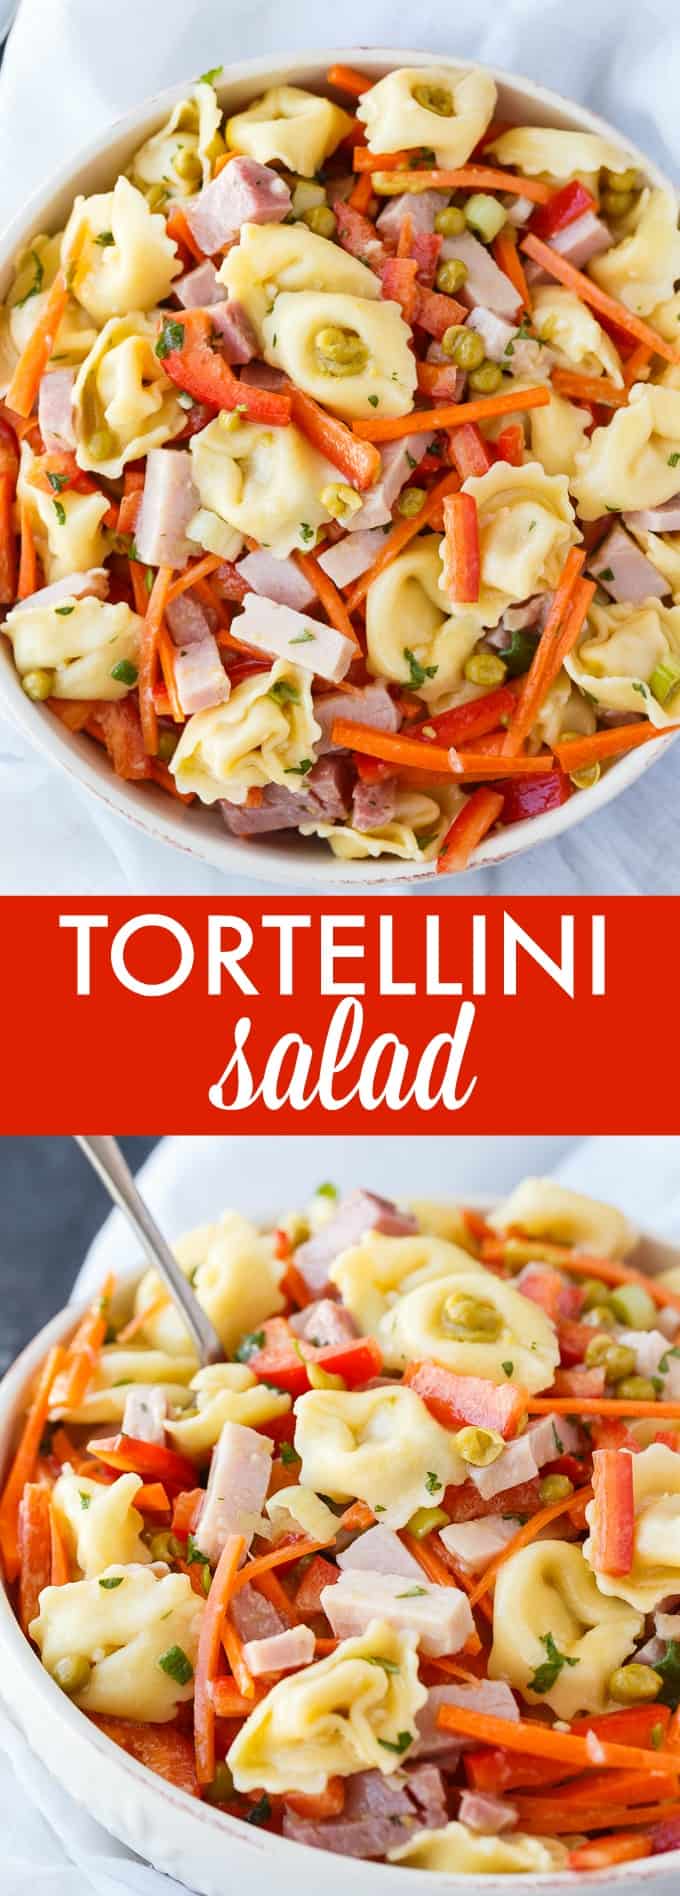 Tortellini Salad - This colorful pasta salad is packed full of flavor with tender pieces of ham, cheese tortellini and fresh, crisp veggies. Serve it at spring and summer parties!